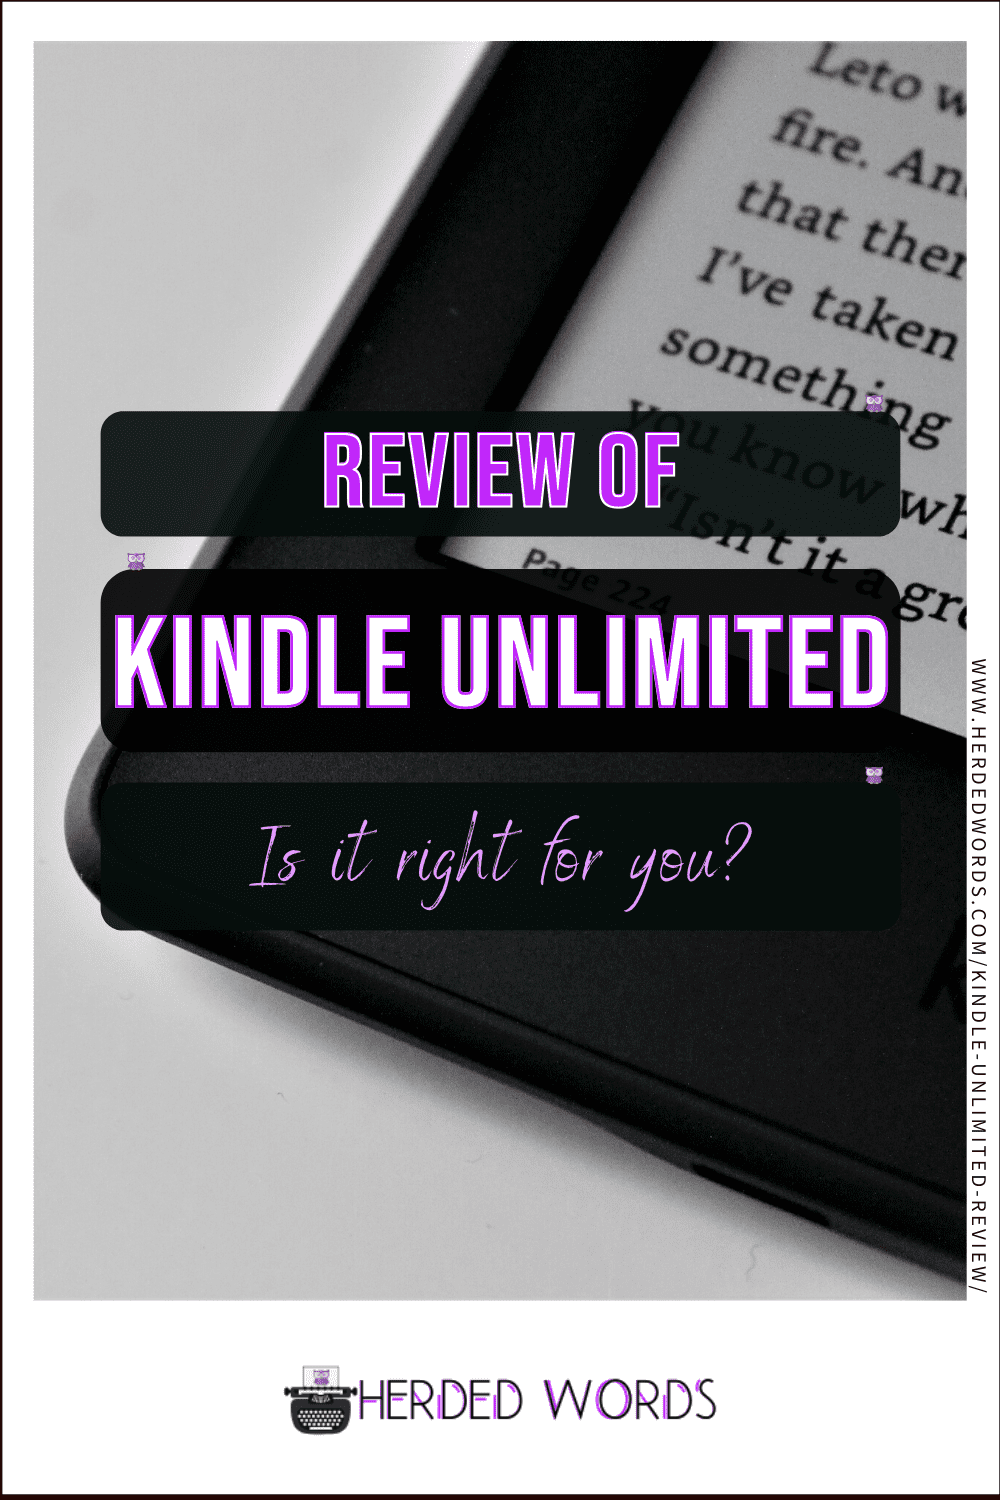 Pin This: Review of Kindle Unlimited (is it right for you?)